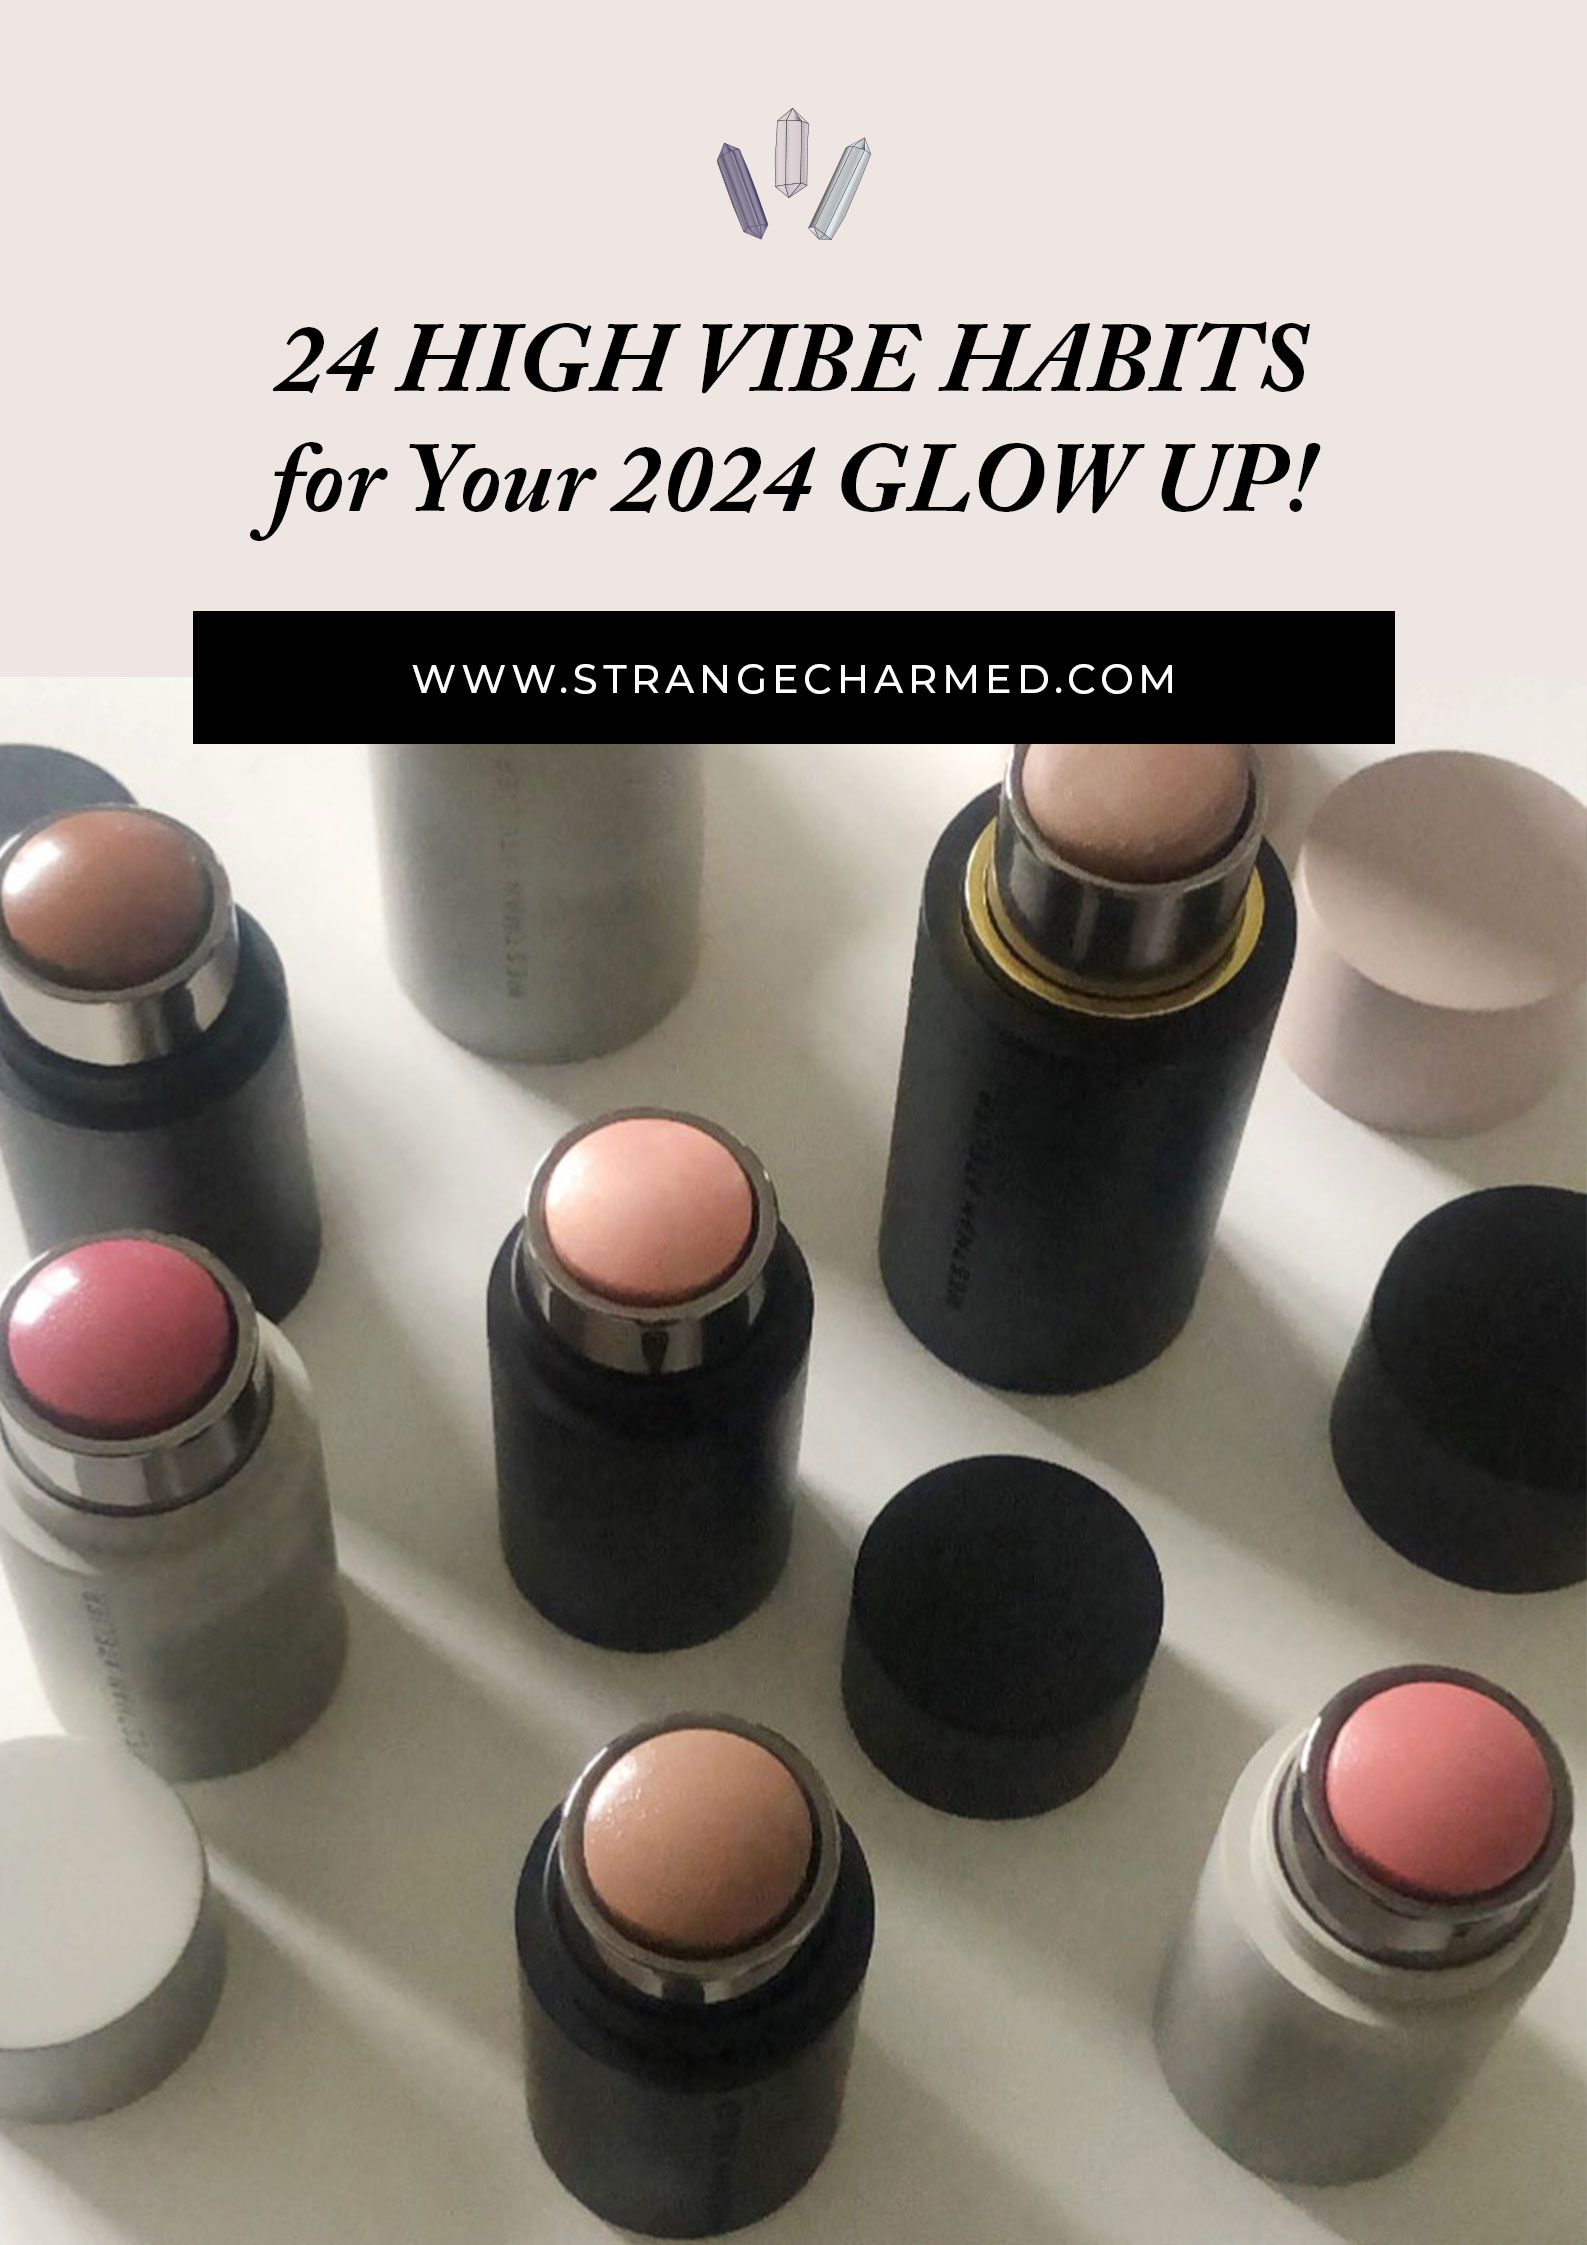 24 HIGH VIBE HABITS for Your 2024 GLOW UP - Strange & Charmed